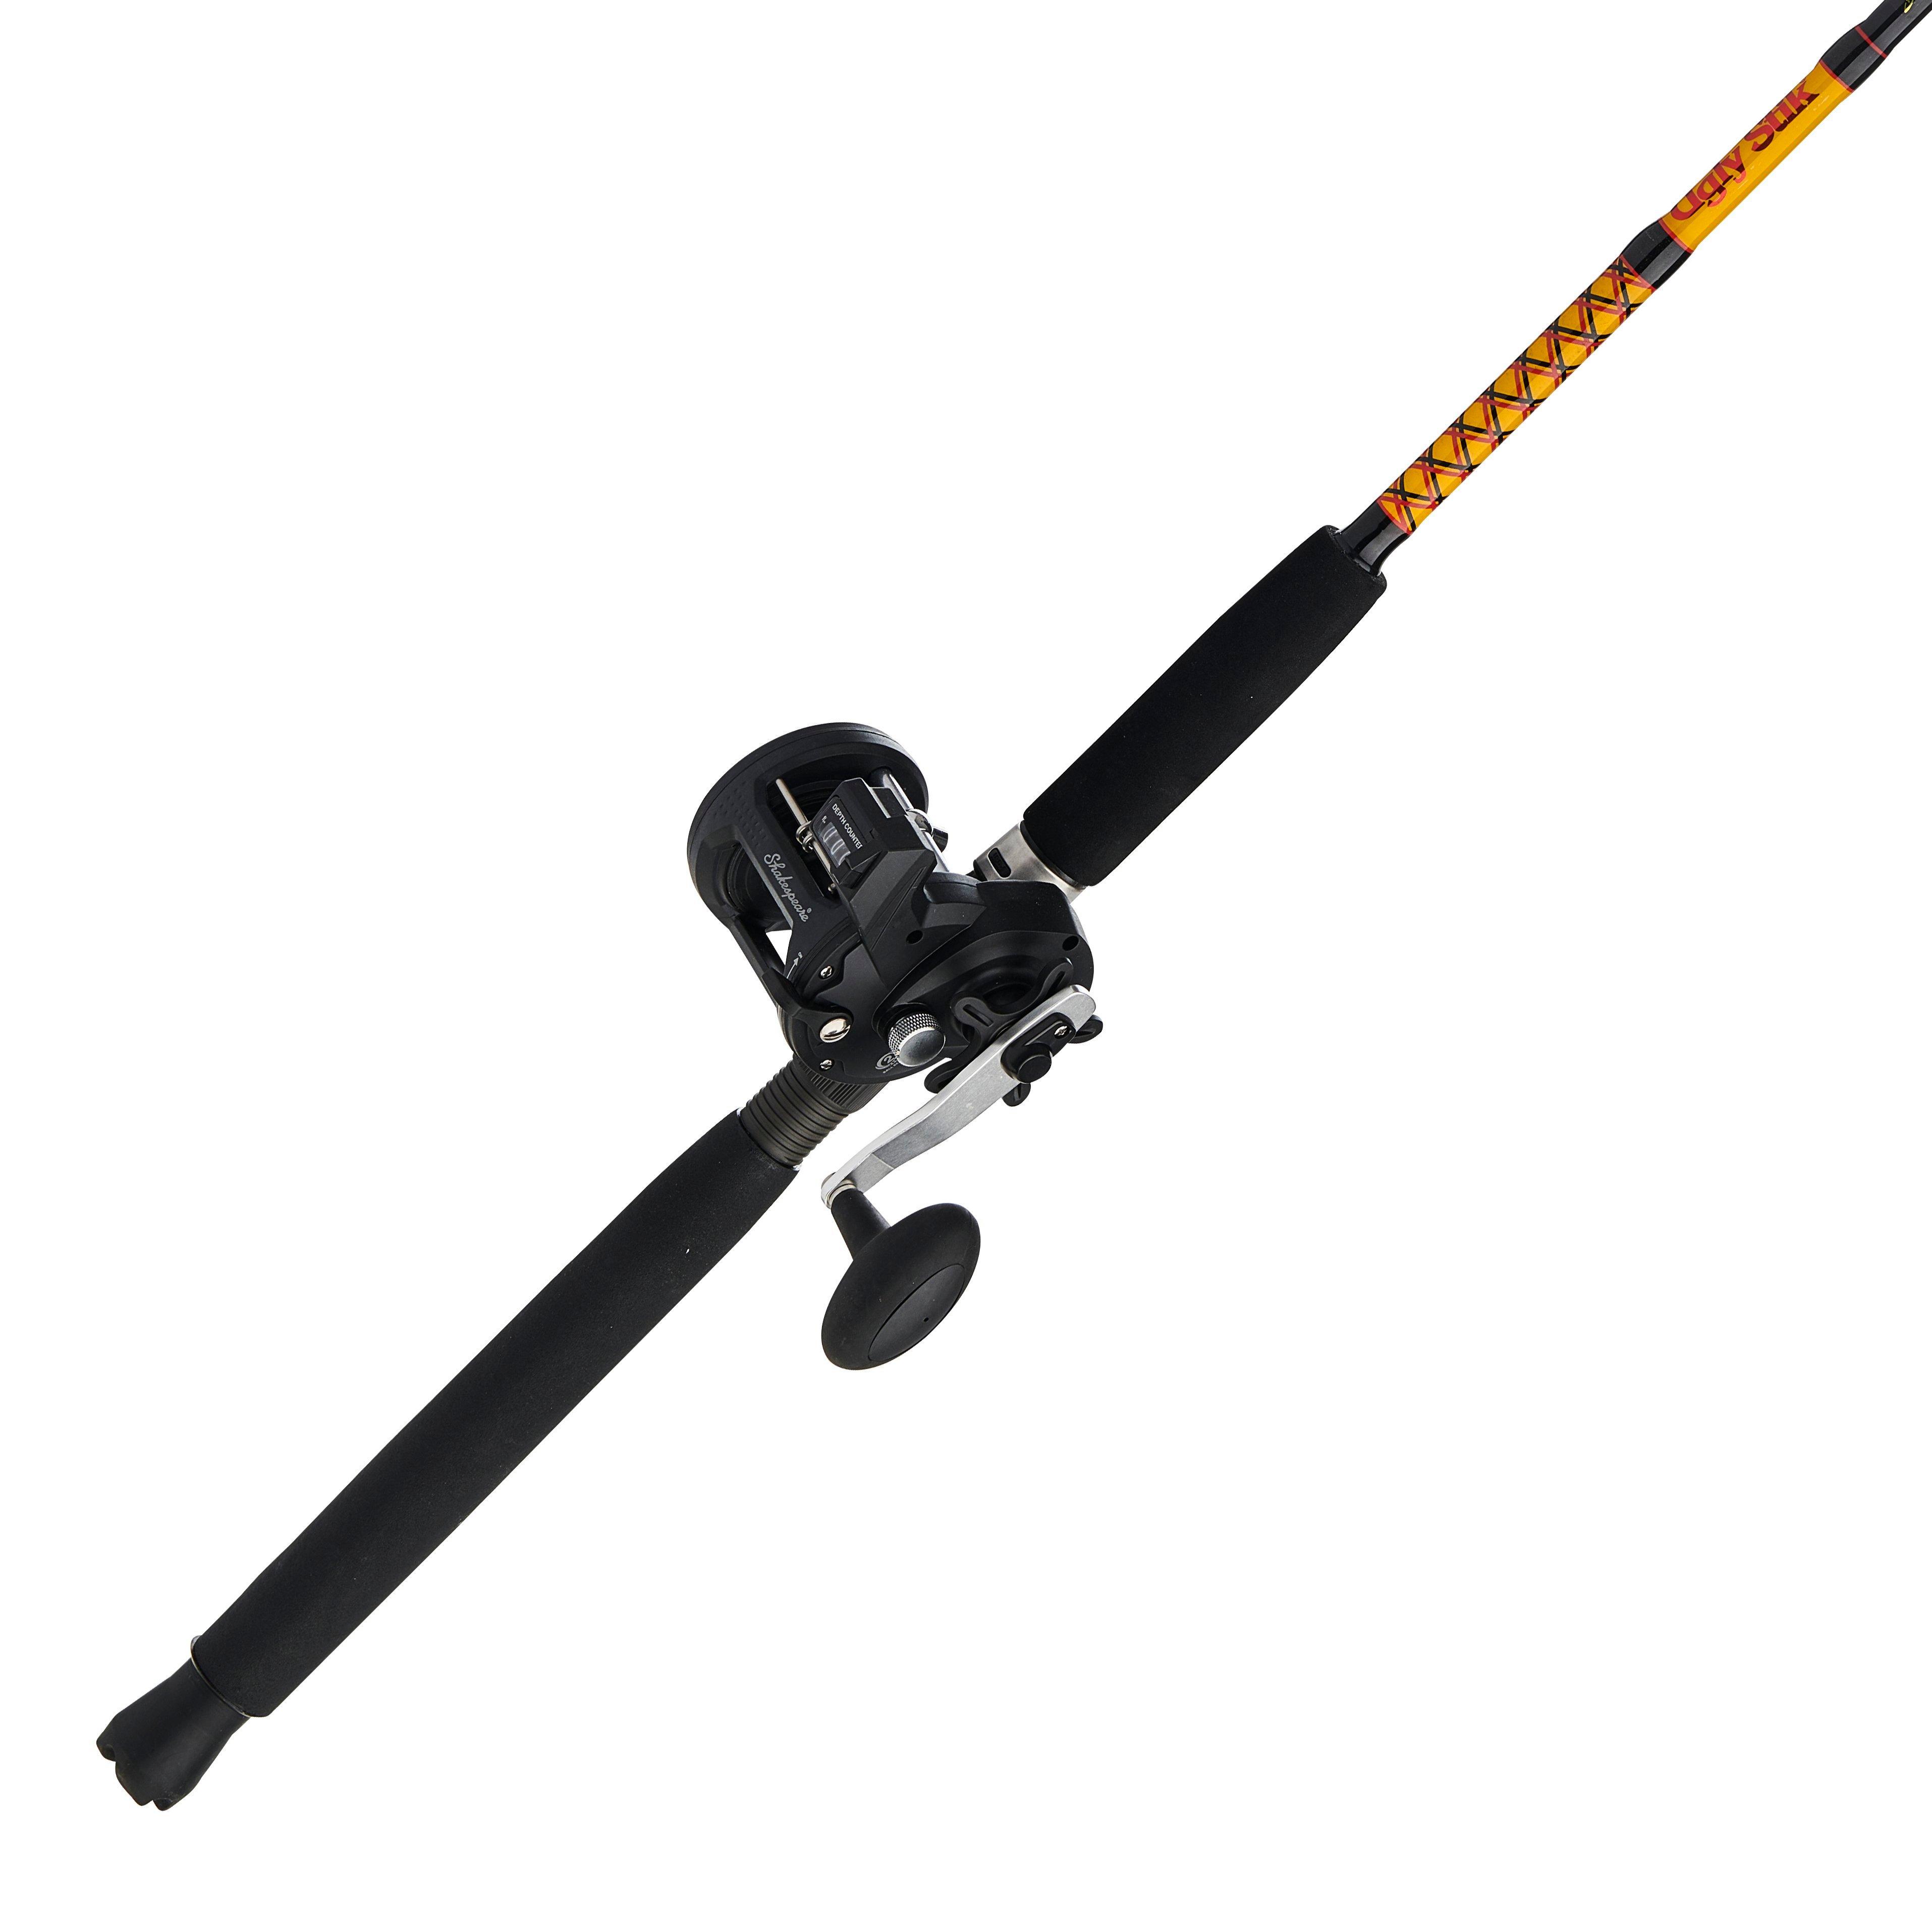 https://op2.0ps.us/original/opplanet-ugly-stik-bigwater-coventional-combo-6-3-1-right-30-9ft-rod-length-light-power-2-pieces-rod-black-red-yellow-bwcdr620c902-30lc-main